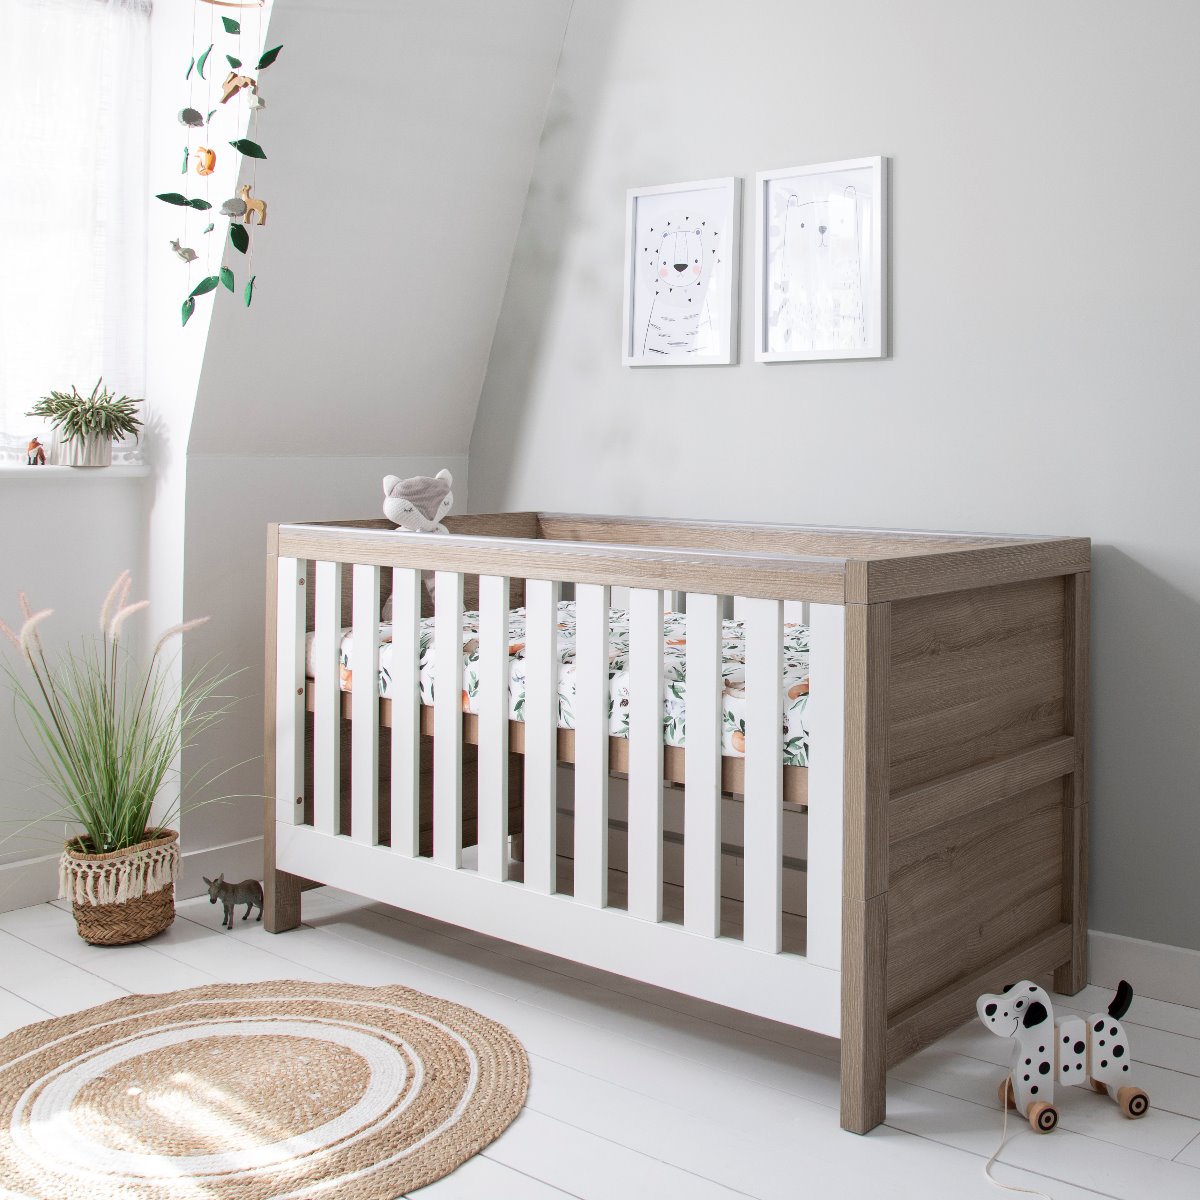 Modena 3 in 1 Cot bed